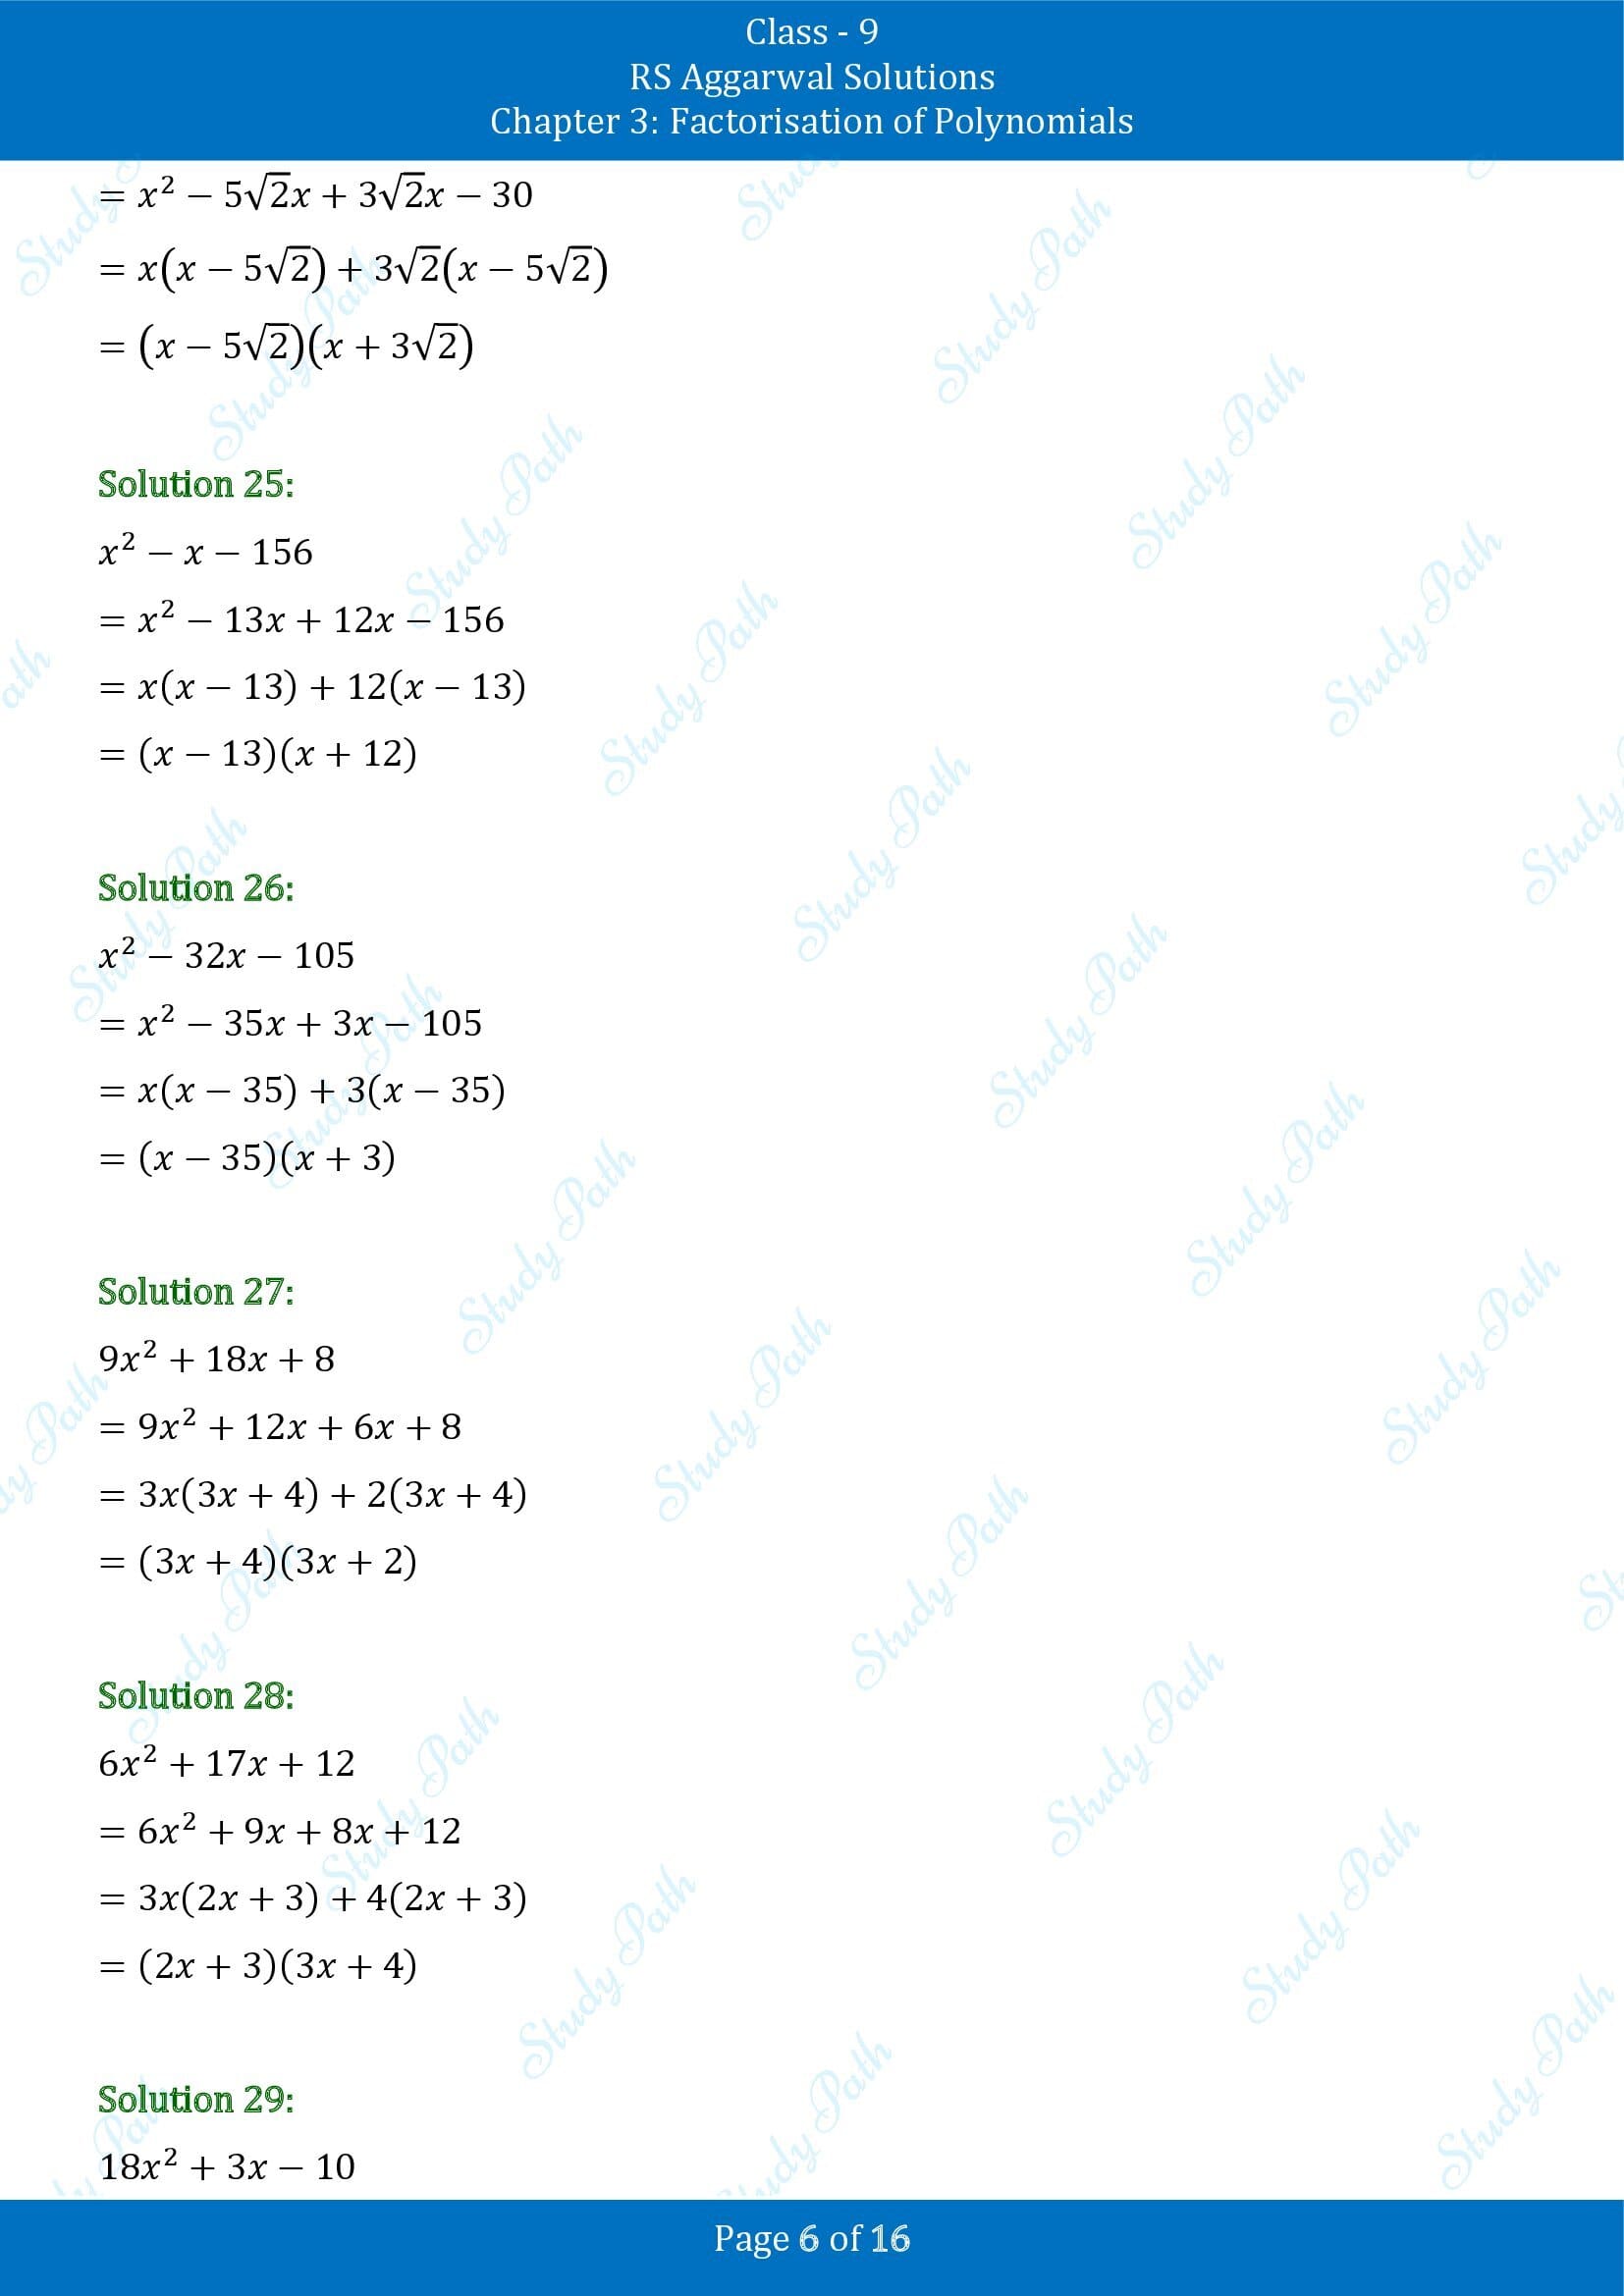 RS Aggarwal Solutions Class 9 Chapter 3 Factorisation of Polynomials Exercise 3C 00006